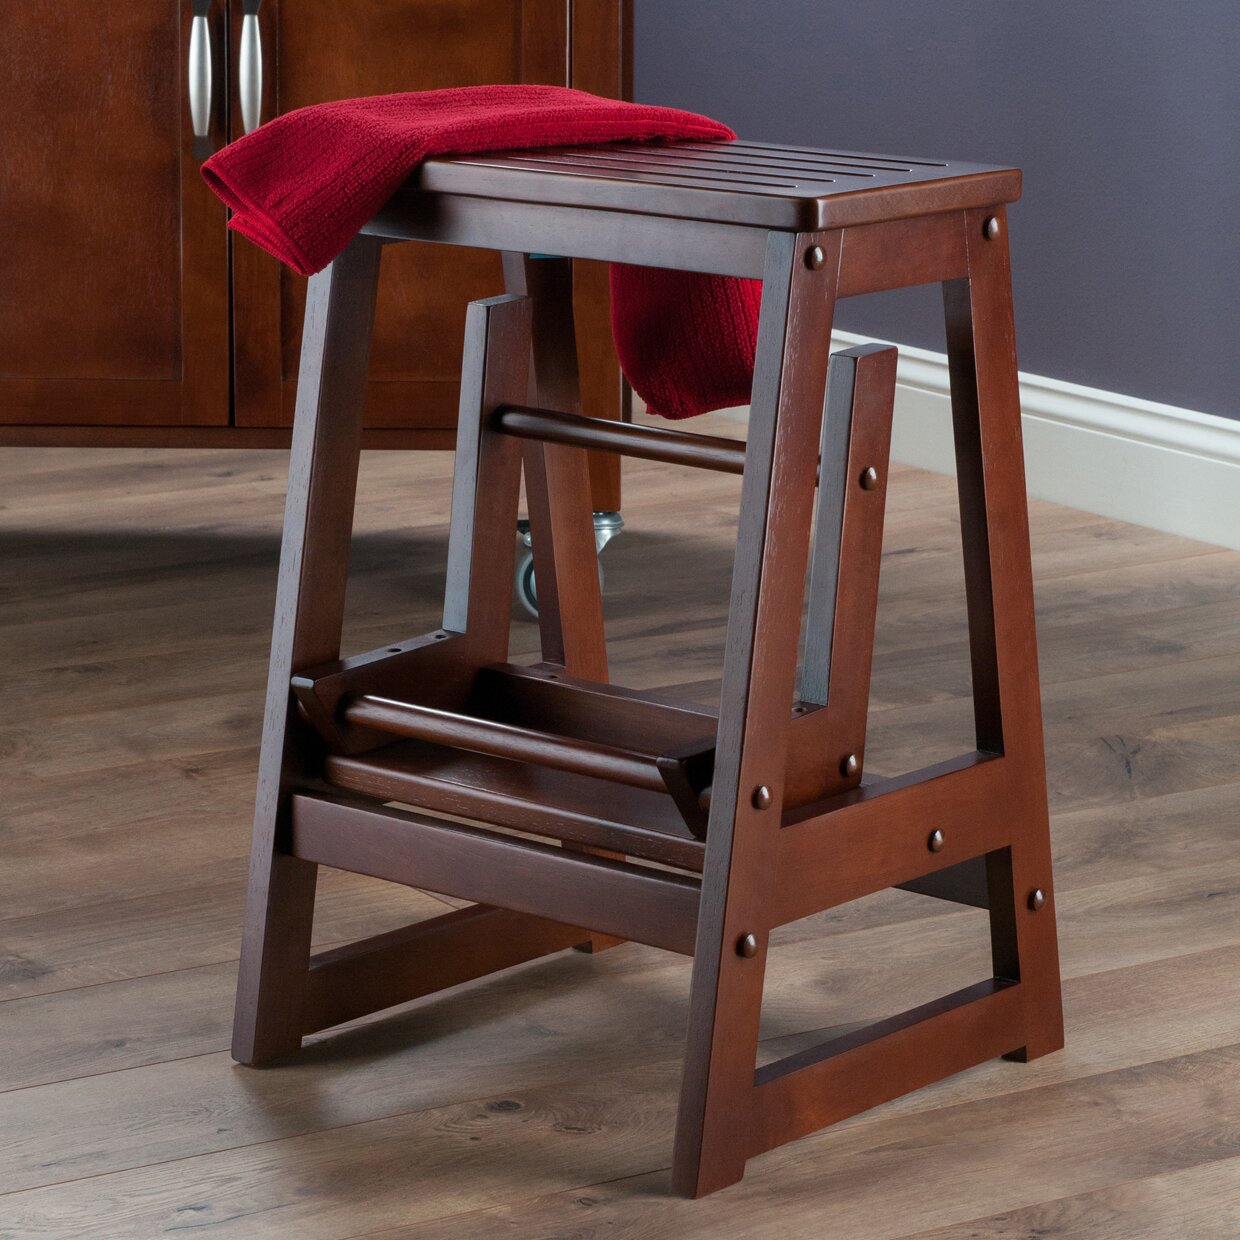 Winsome 2-Step Wood Step Stool with 200 lb. Load Capacity ...